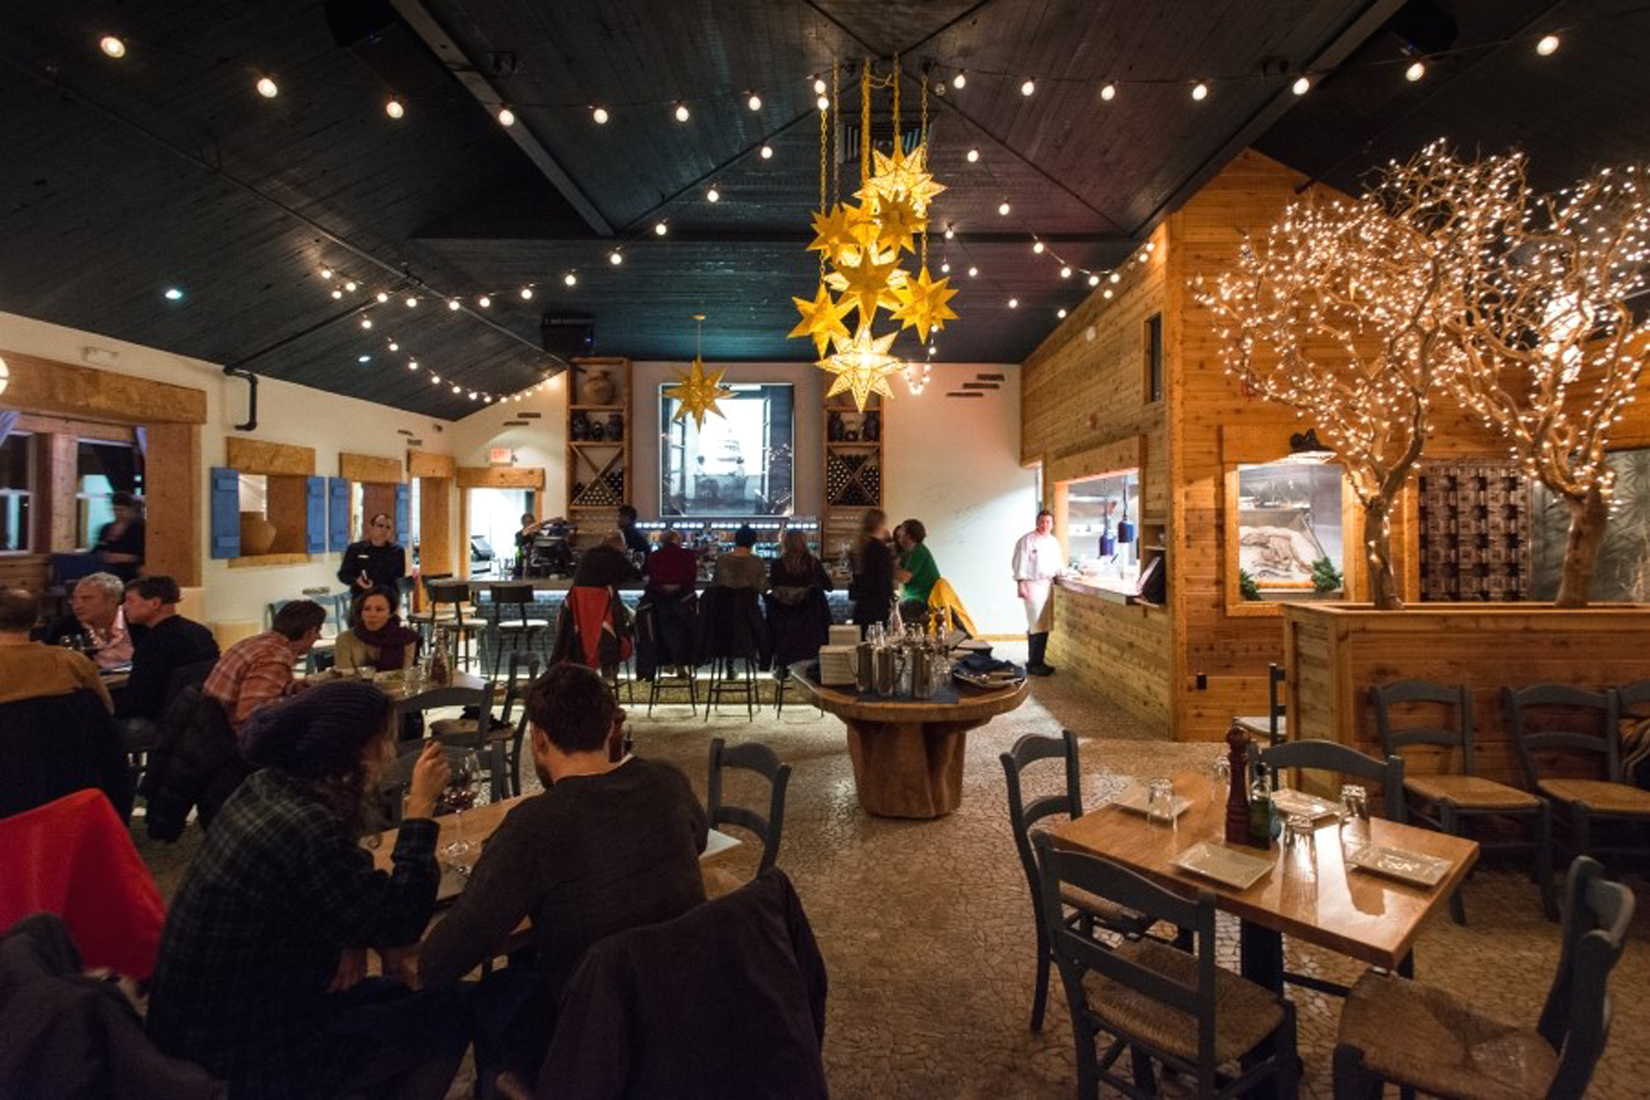 Jimmy’s Taverna at the Sierra Nevada Resort & Spa in Mammoth Lakes boasts an award-winning wine list that pairs unexpected offerings from Syria, Greece and Lebanon with the Mediterranean menu.